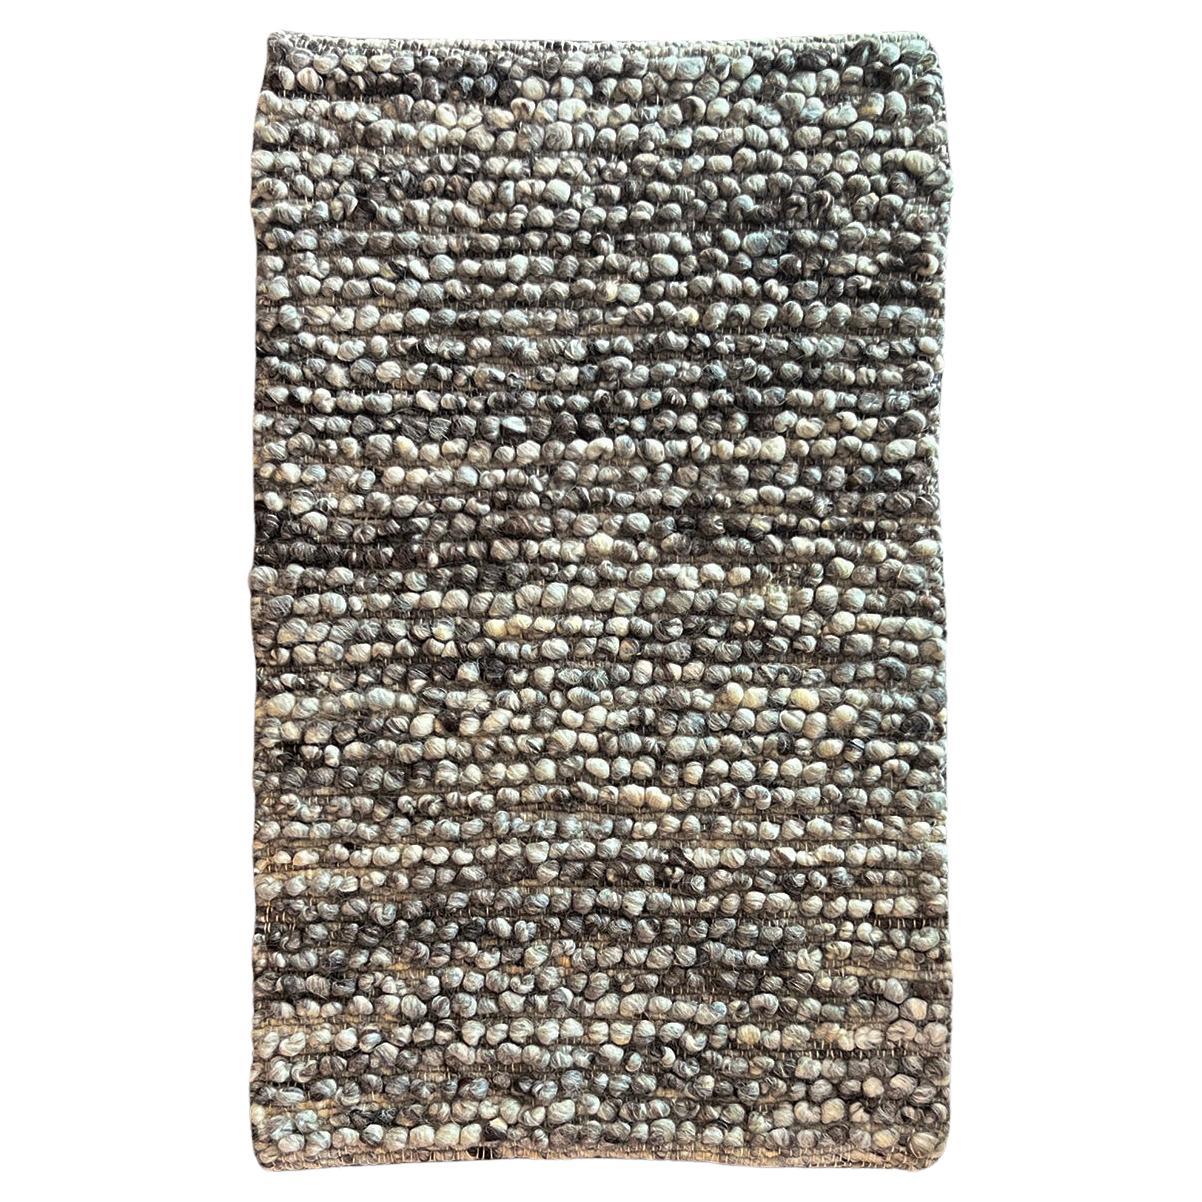 Fatima Bobble Sheep Wool Area Rug in Gray 2.5ft by 4ft, Handmade For Sale